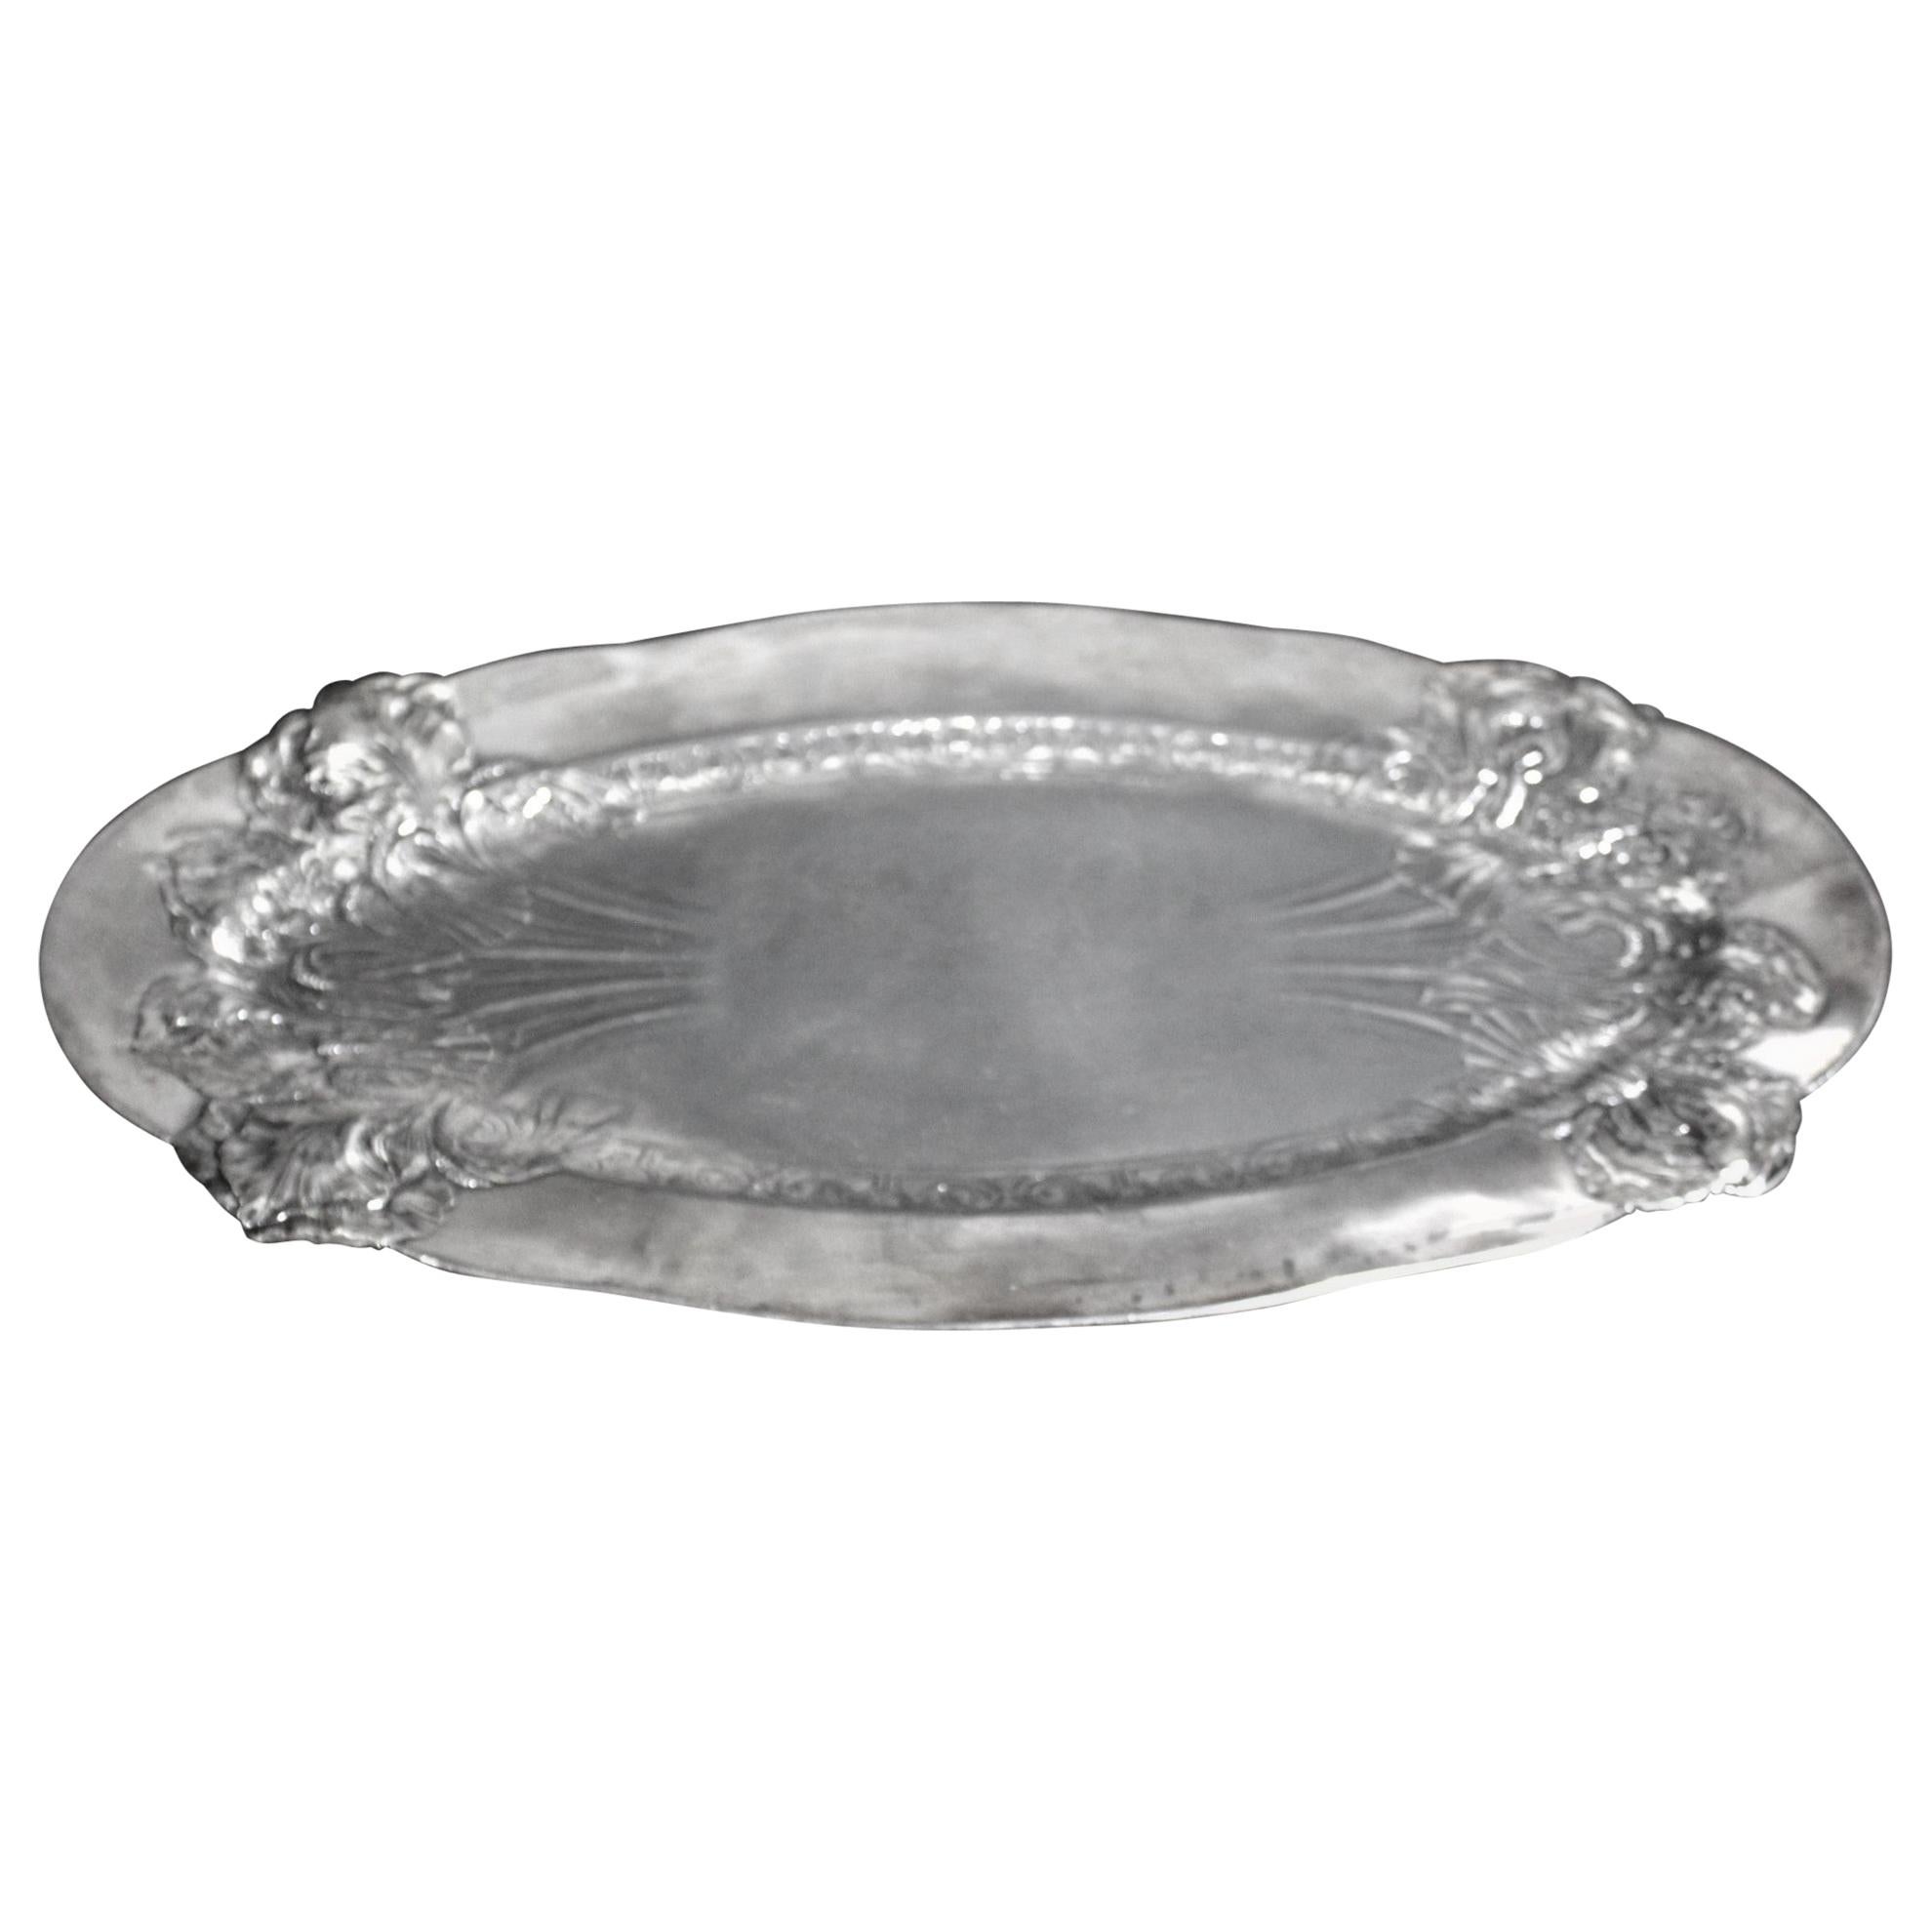 Antique Art Nouveau Silver Plated Oval Serving Tray with Raised Floral Motif